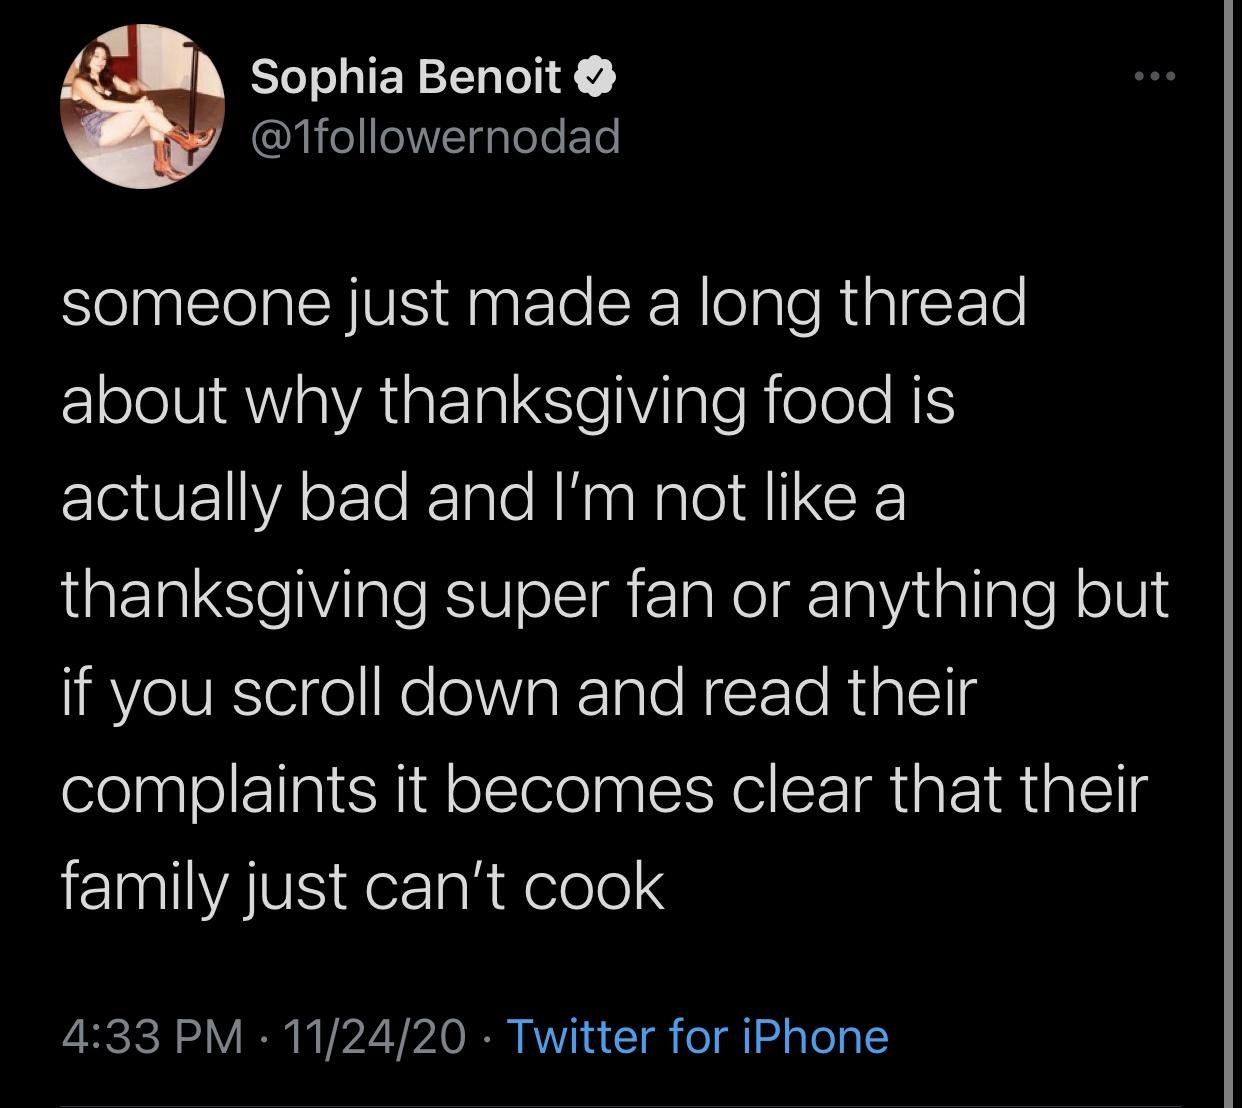 screenshot - Sophia Benoit someone just made a long thread about why thanksgiving food is actually bad and I'm not a thanksgiving super fan or anything but if you scroll down and read their complaints it becomes clear that their family just can't cook 112